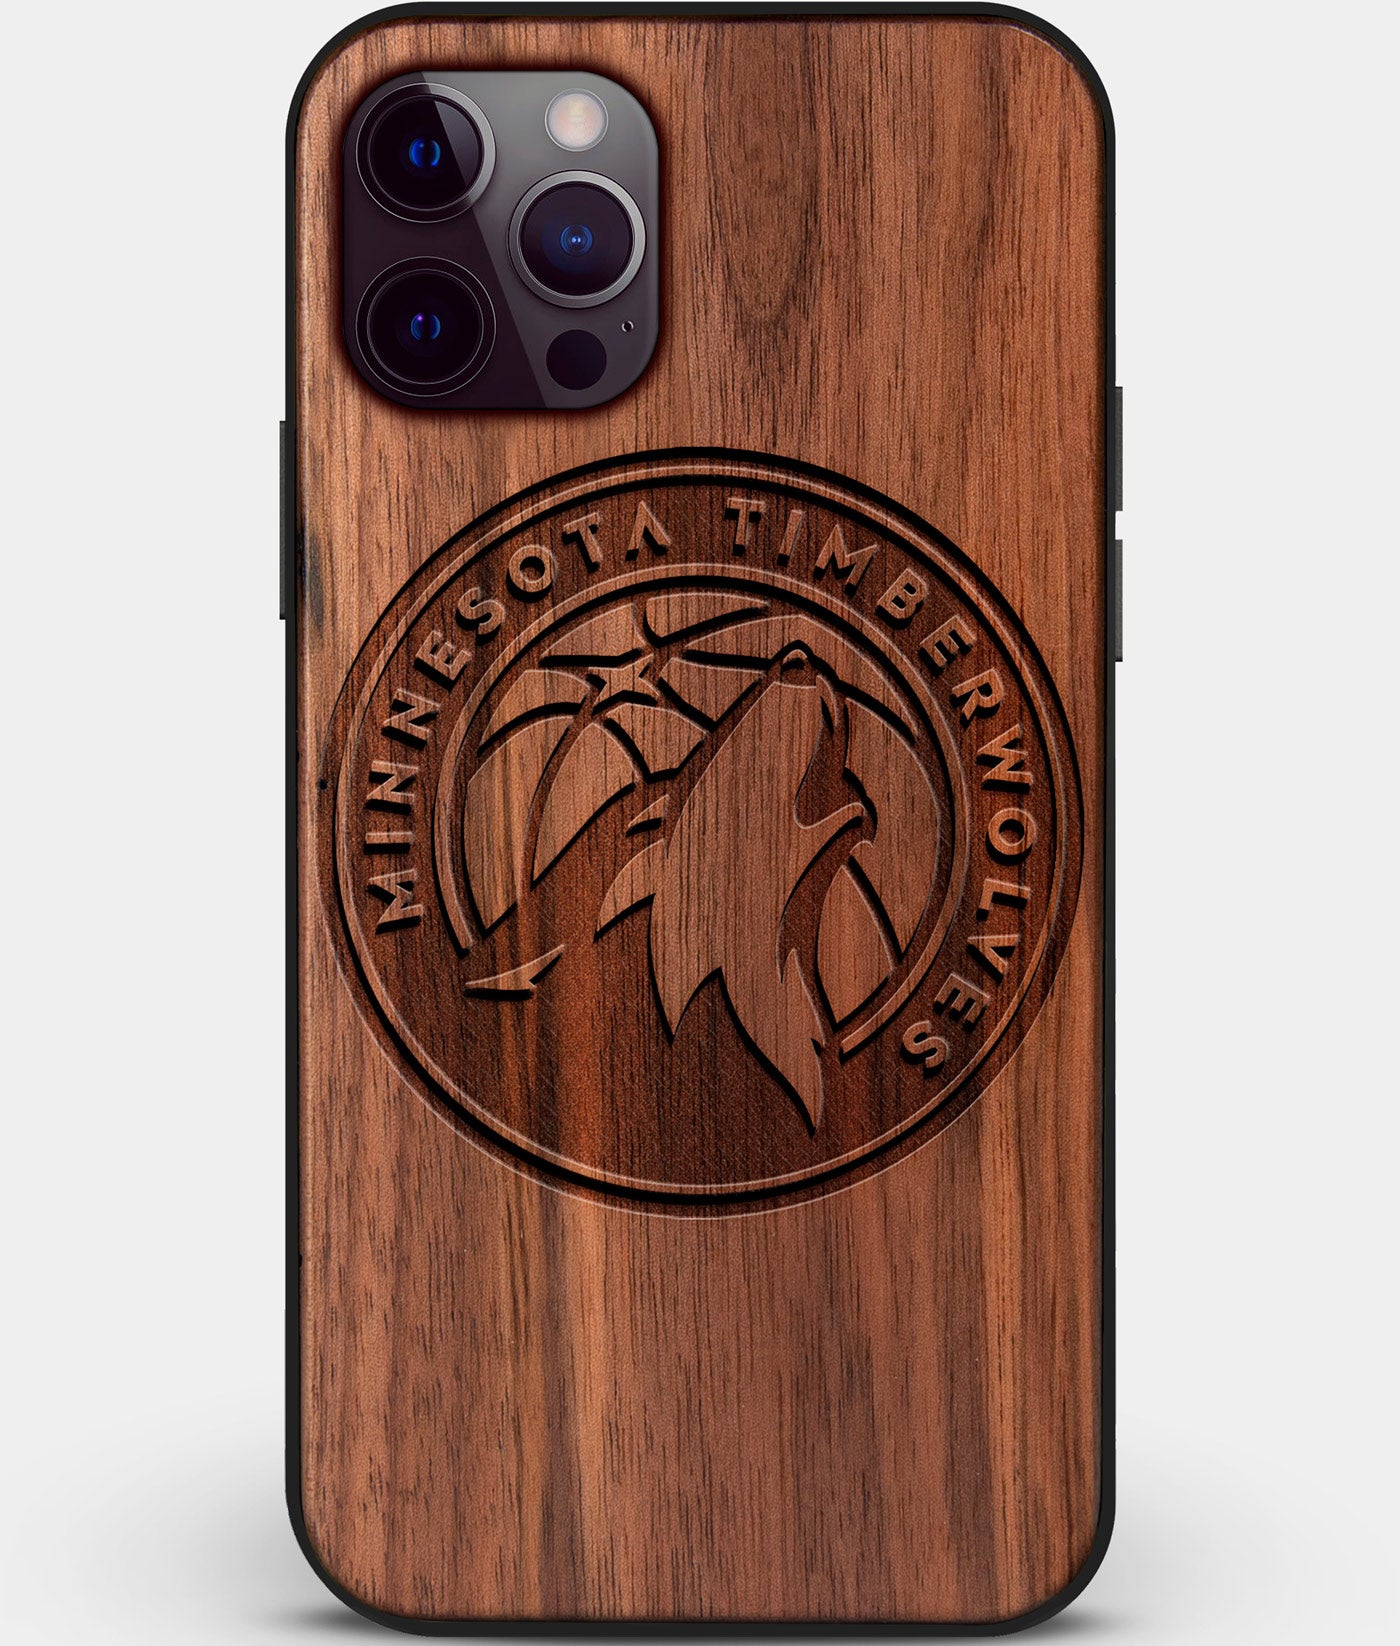 Custom Carved Wood Minnesota Timberwolves iPhone 12 Pro Max Case | Personalized Walnut Wood Minnesota Timberwolves Cover, Birthday Gift, Gifts For Him, Monogrammed Gift For Fan | by Engraved In Nature